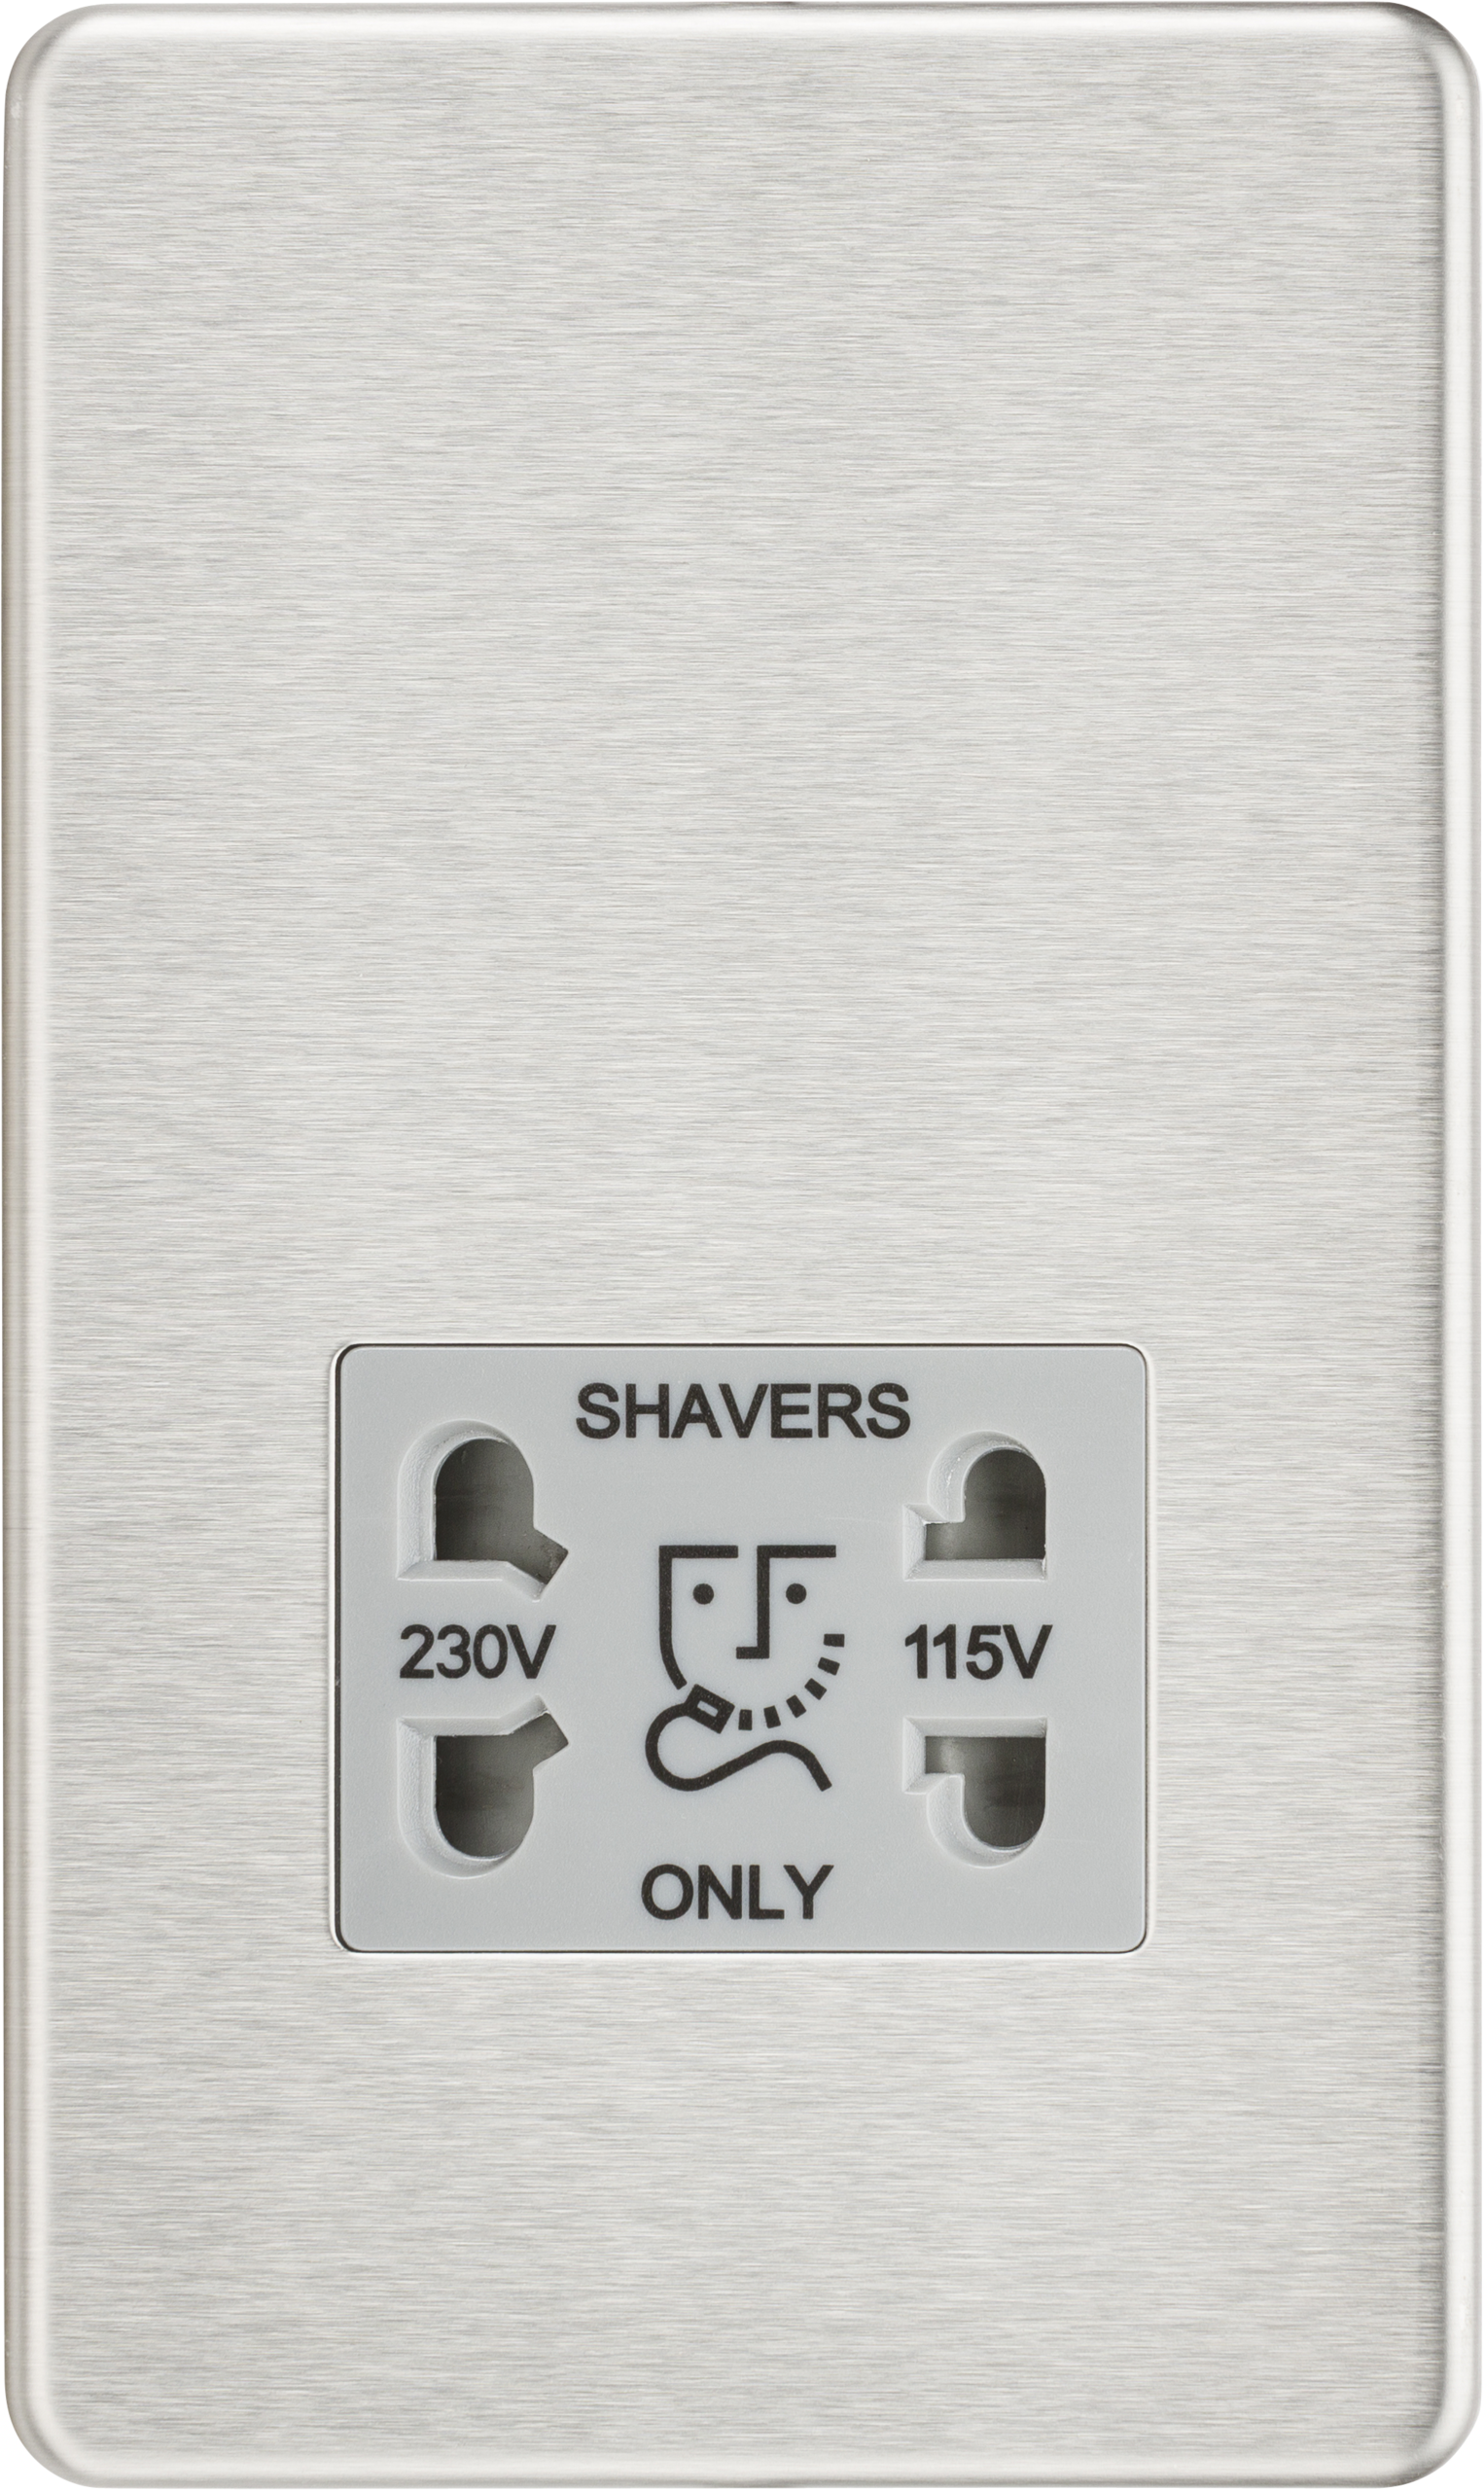 Screwless 115/230V Dual Voltage Shaver Socket - Brushed Chrome With Grey Insert - SF8900BCG 